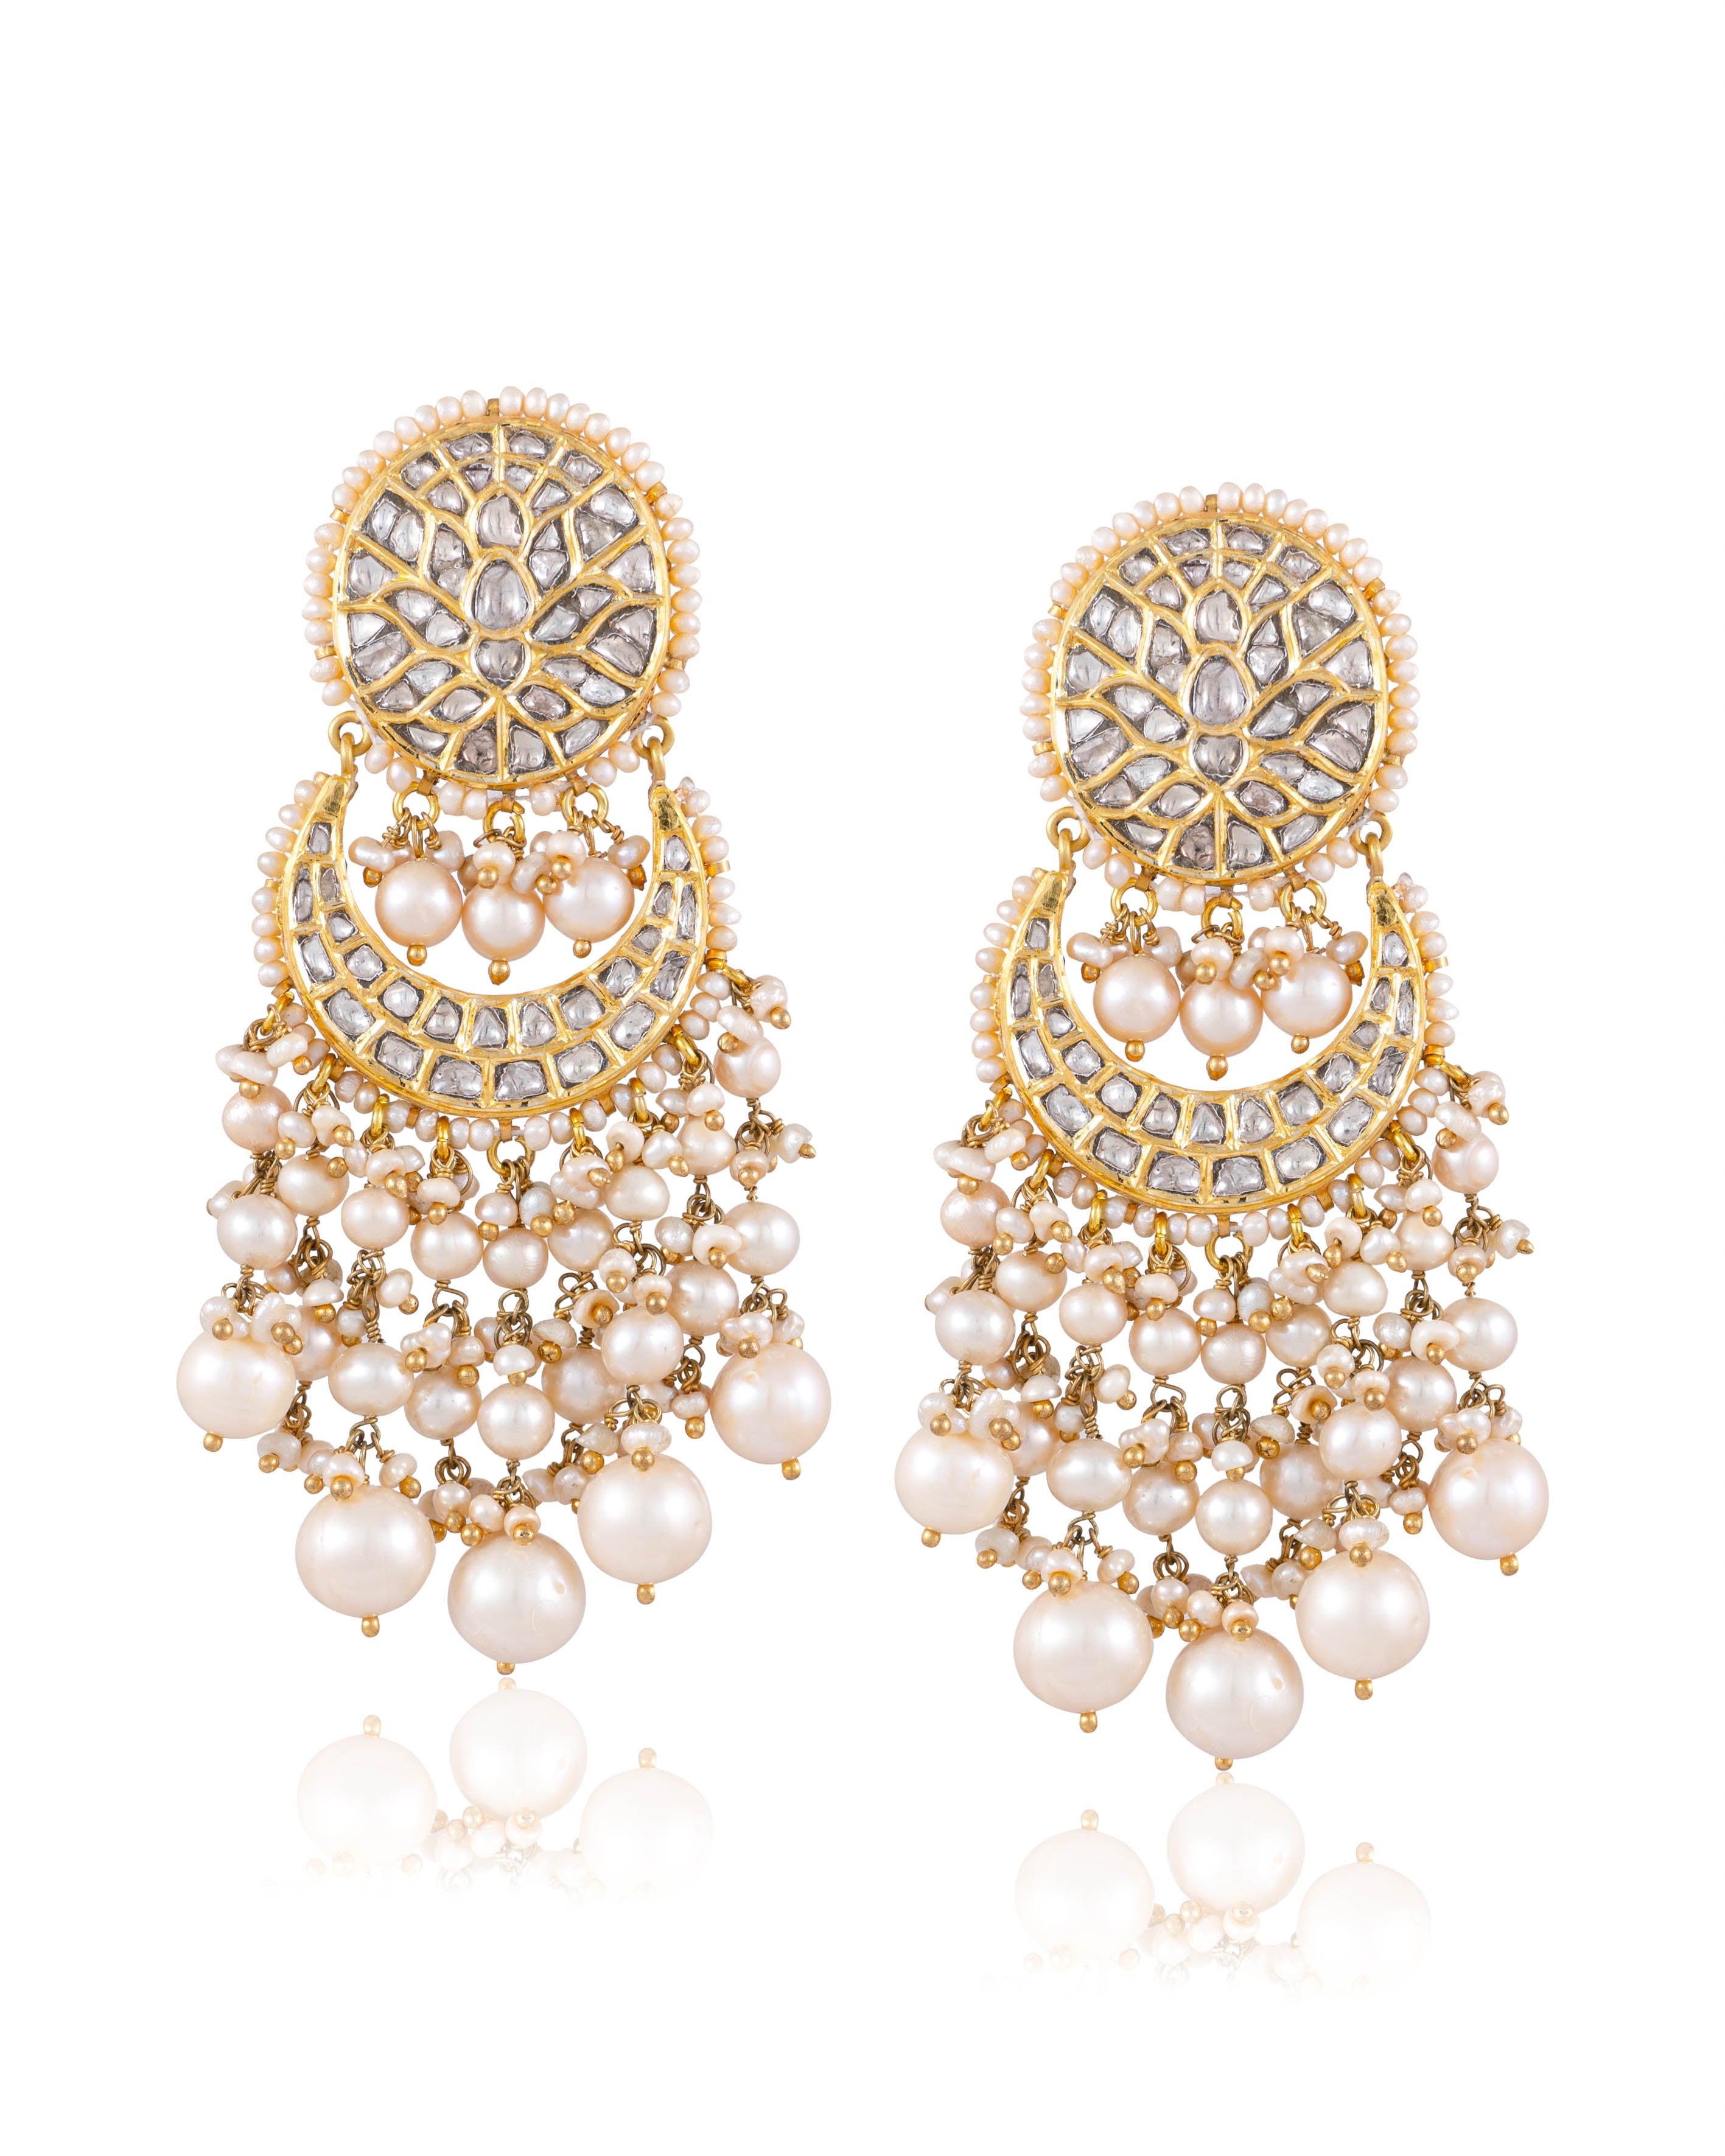 Sharmin Polki Chandbalis - Exquisite Traditional Earrings from Rocky and Rani Collection